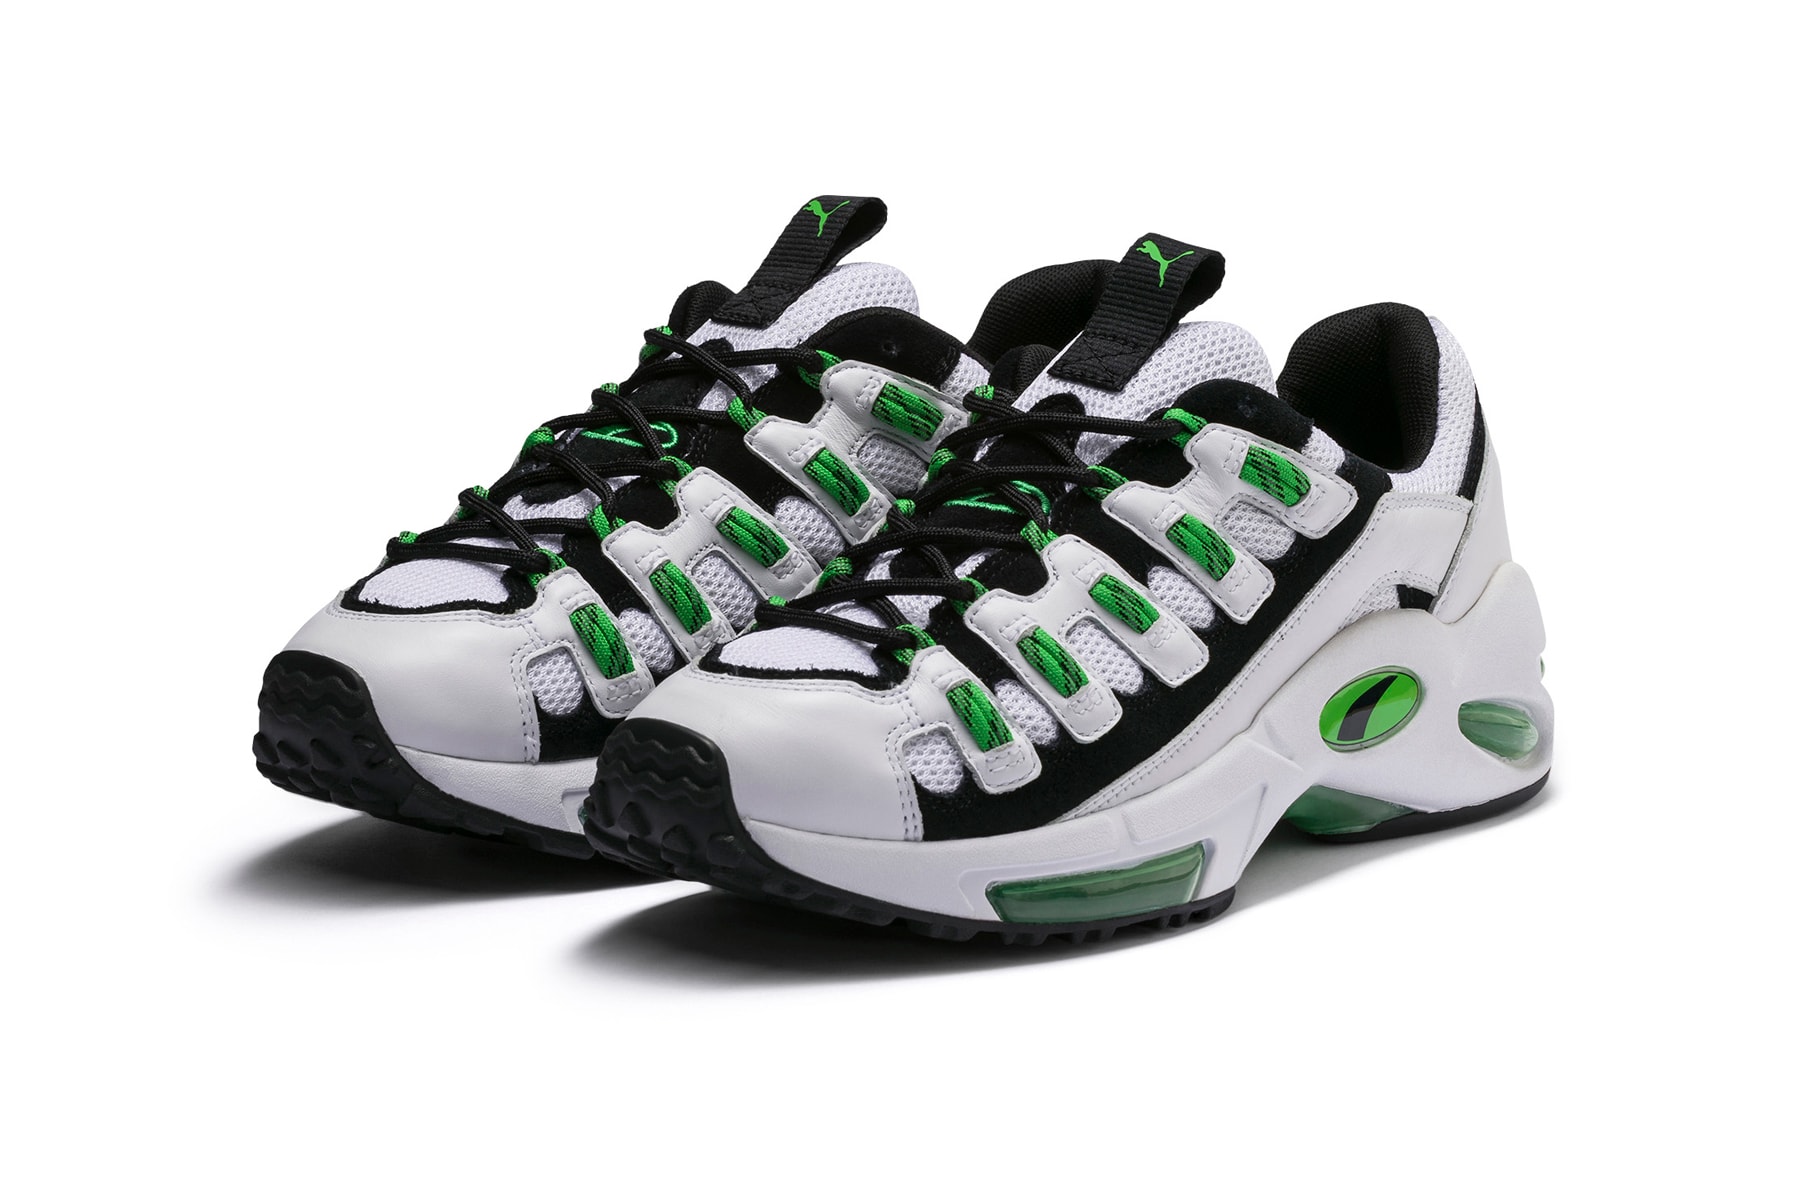 PUMA CELL Endura Release date information pictures on feet foot model lookbook background product shots phots White Surf The Web 1998 runner running sneaker visible air sole unit midsole bubble